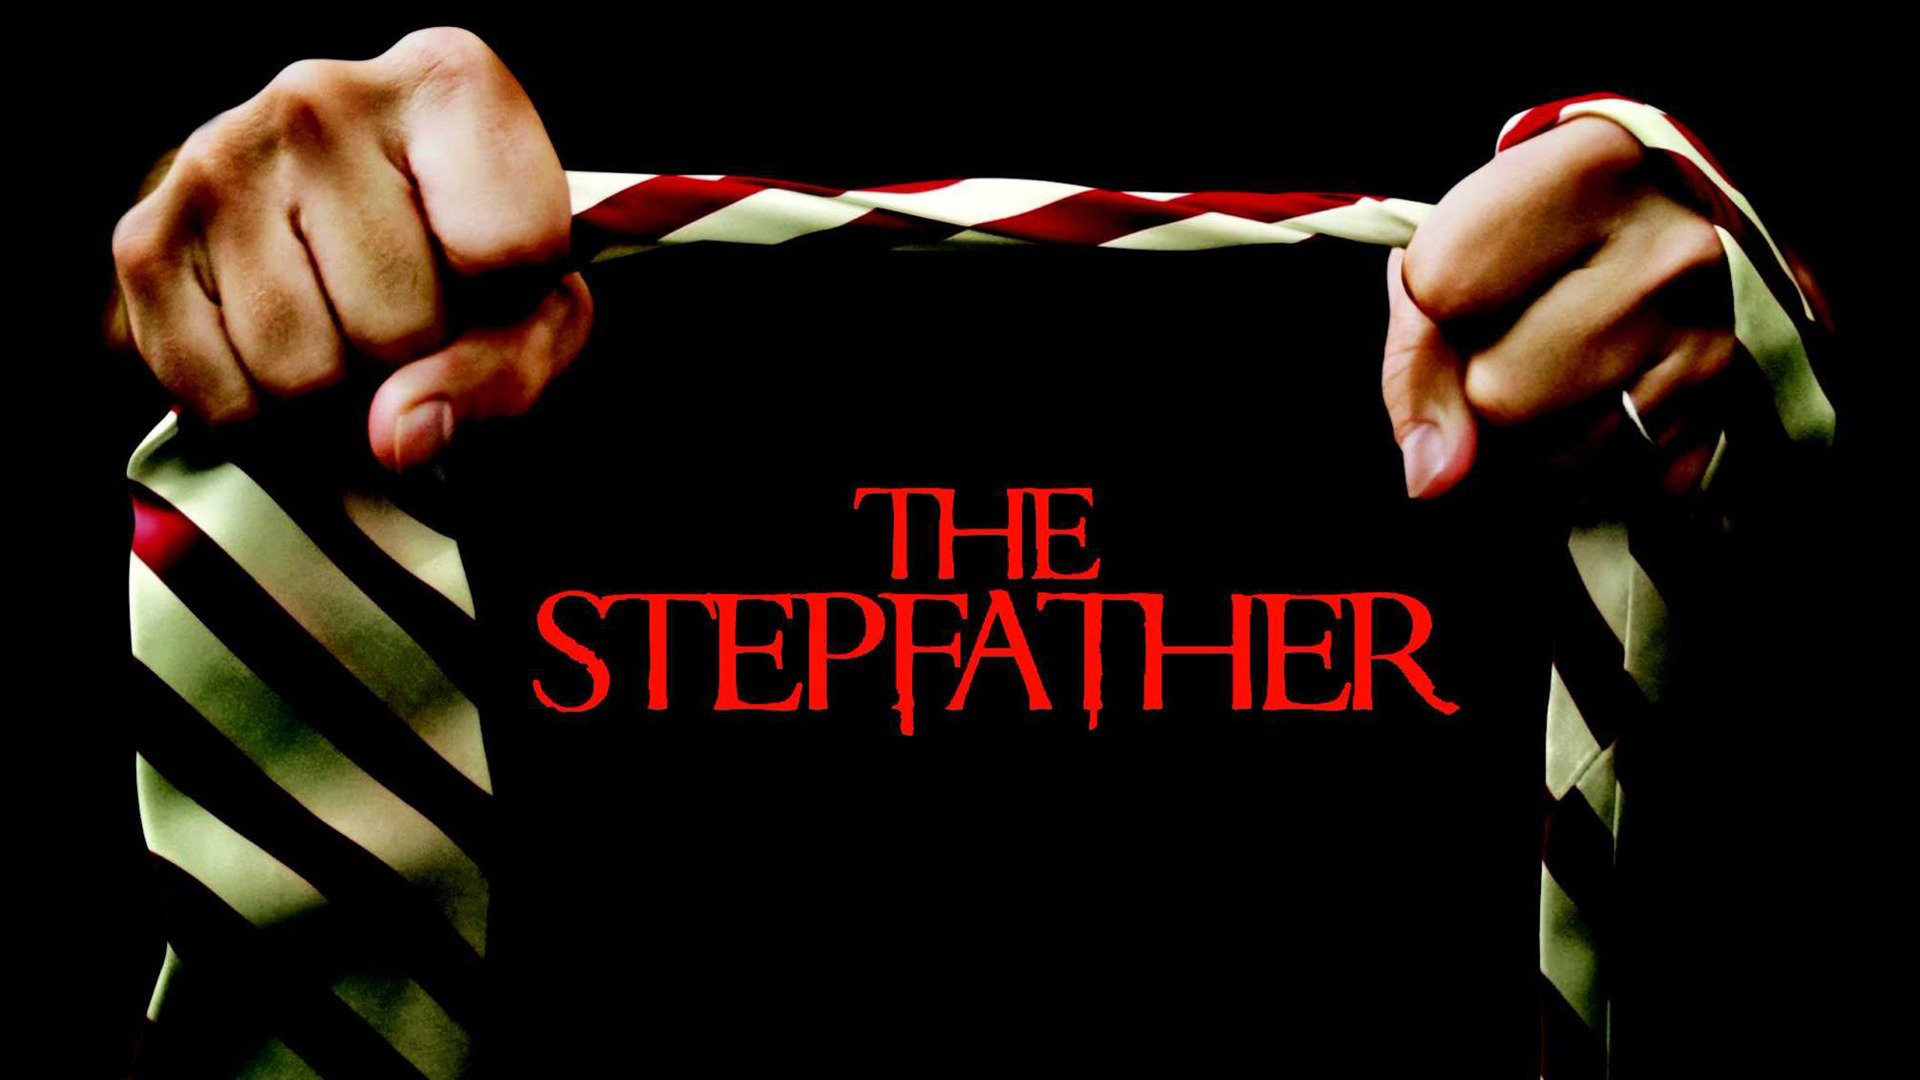 The Stepfather - Watch Full Movie on Paramount Plus